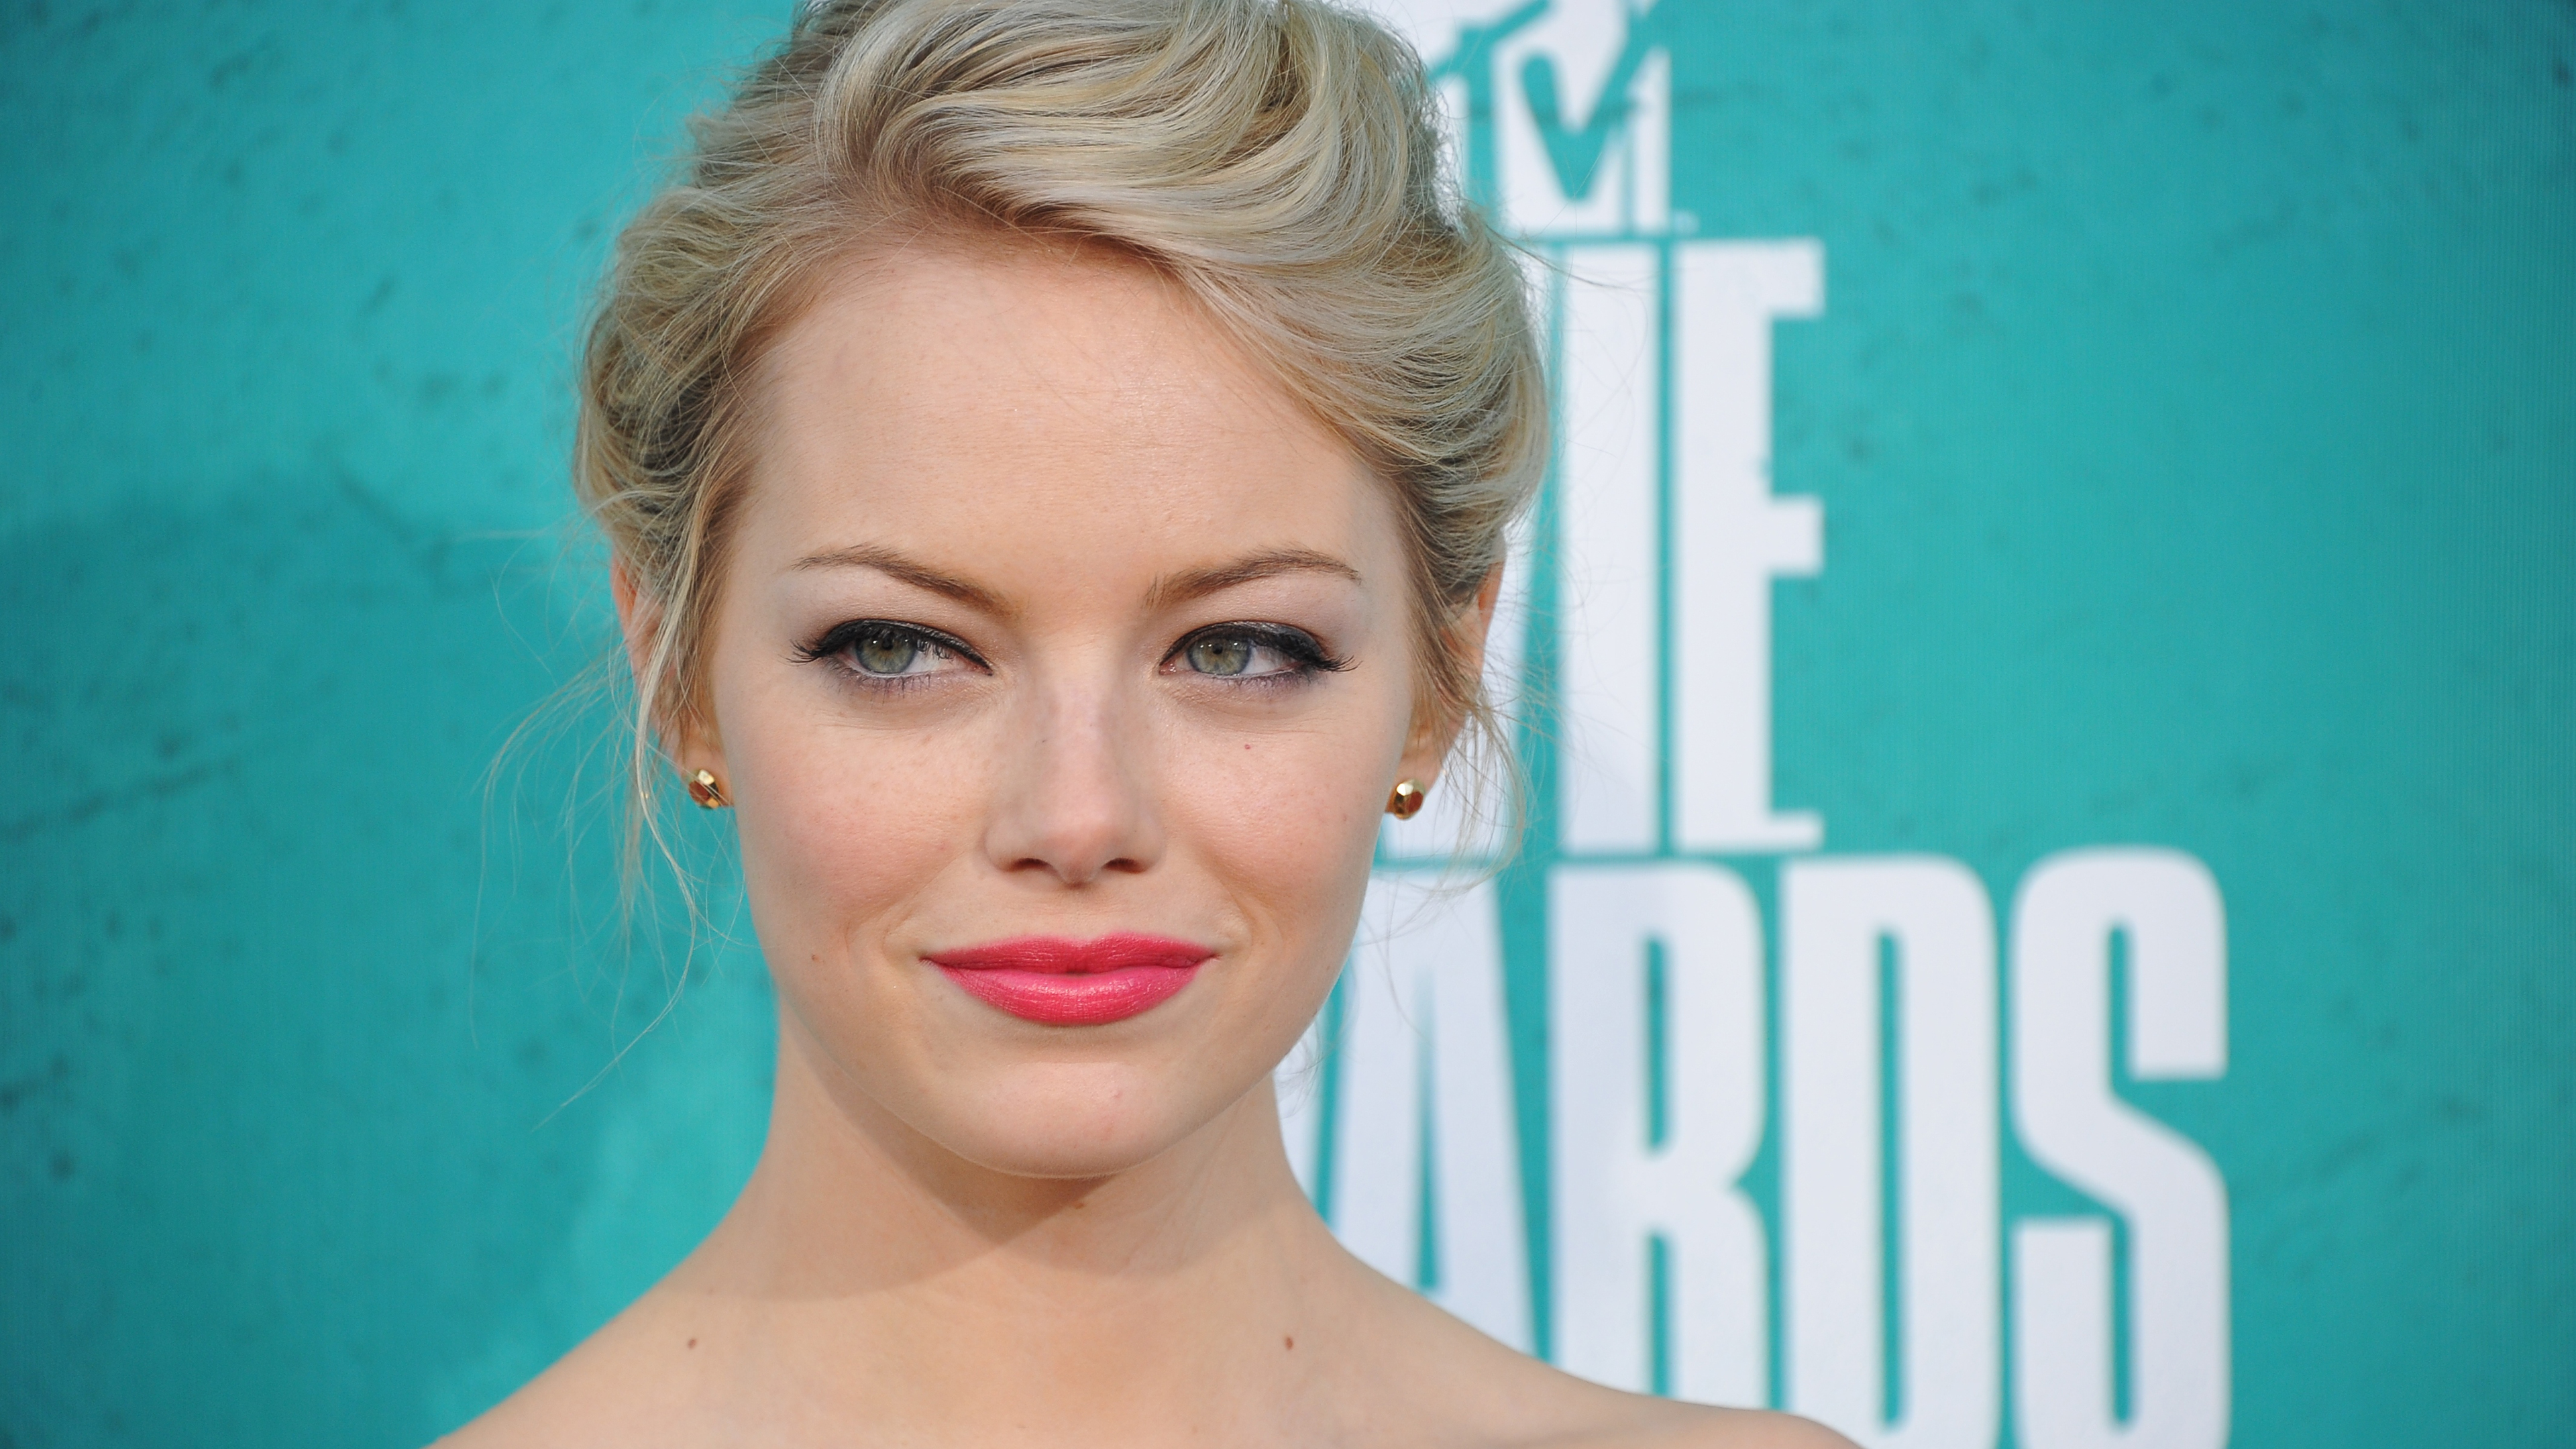 Cute Emma Stone With Brown Eyes And Blonde Hair K 2K Emma Stone